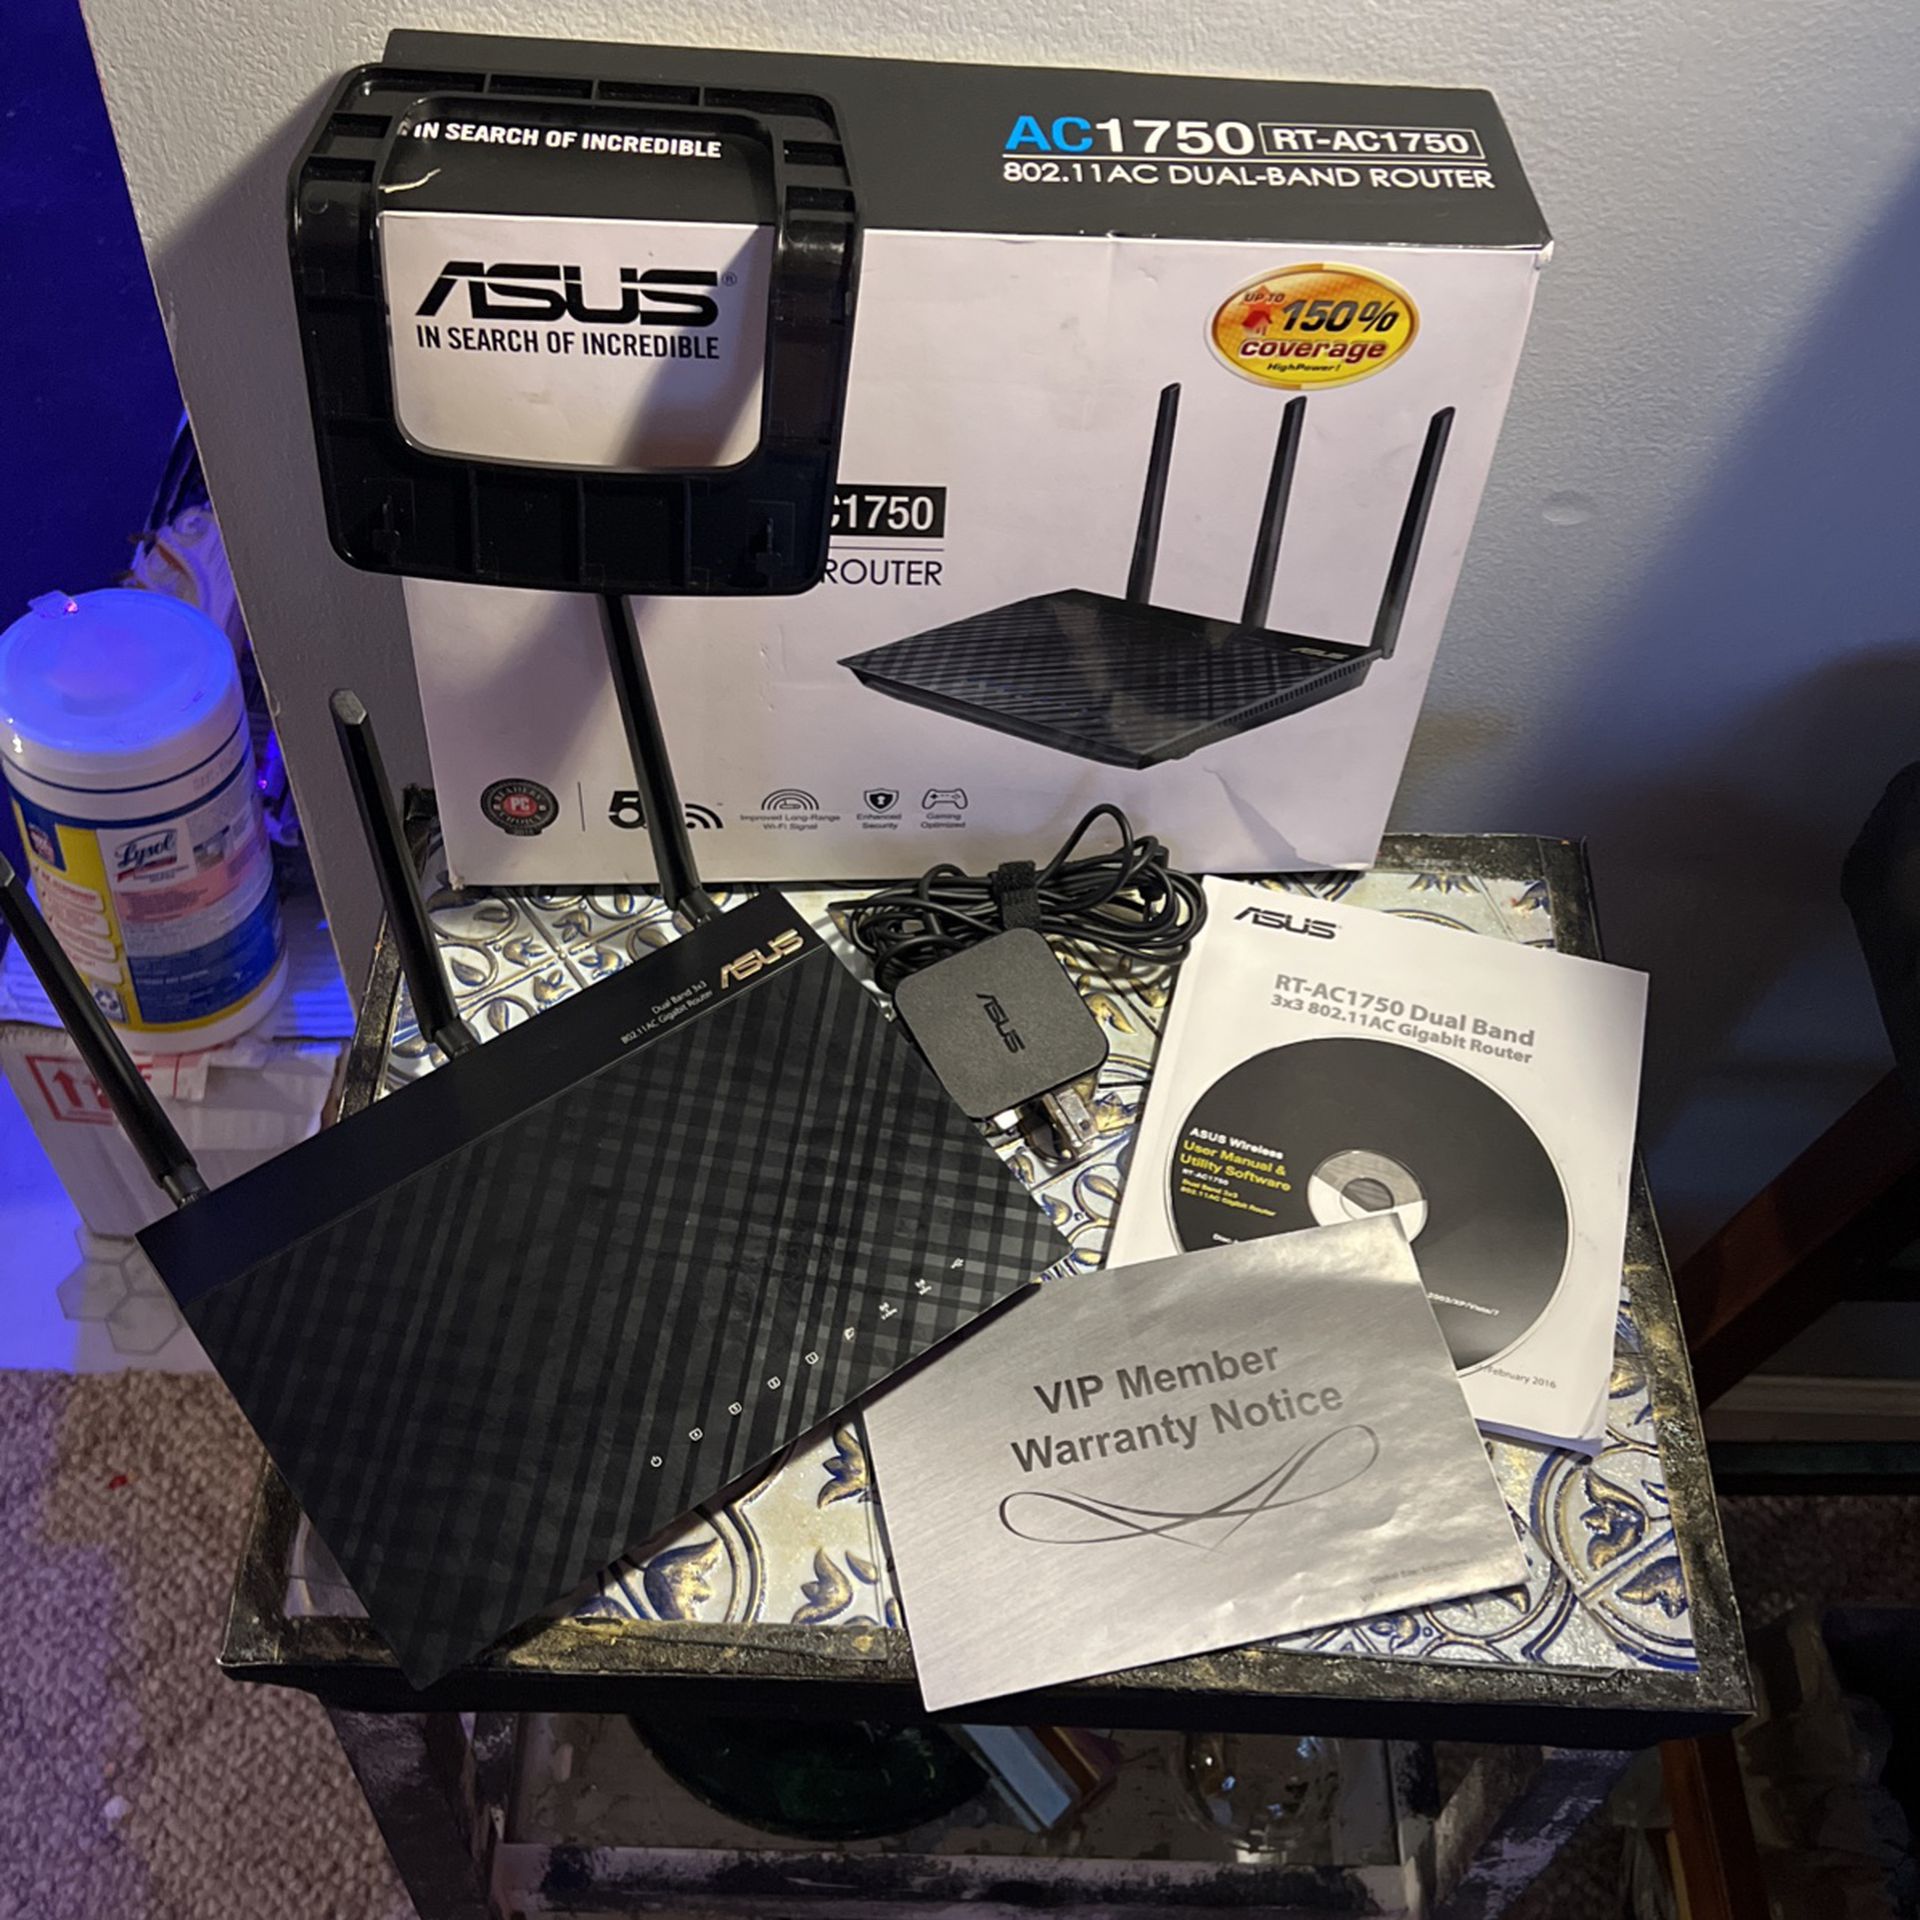 ASUS Dual Band Router